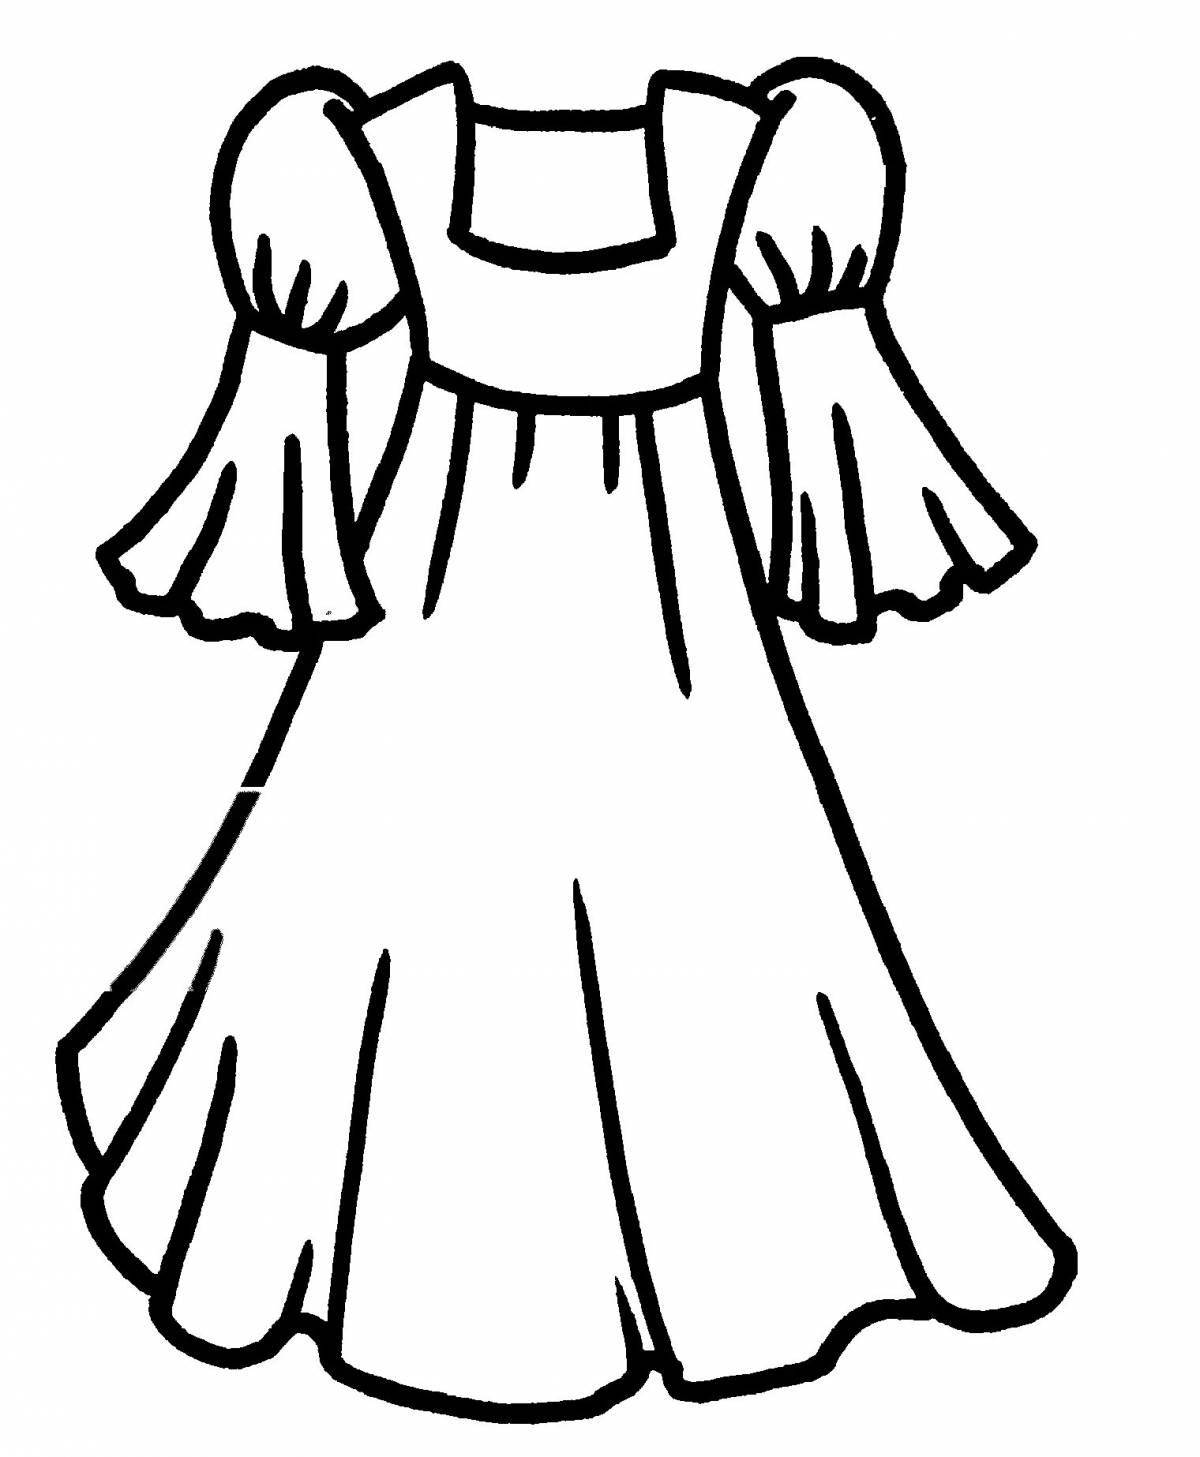 Coloring page dazzling dress for kids